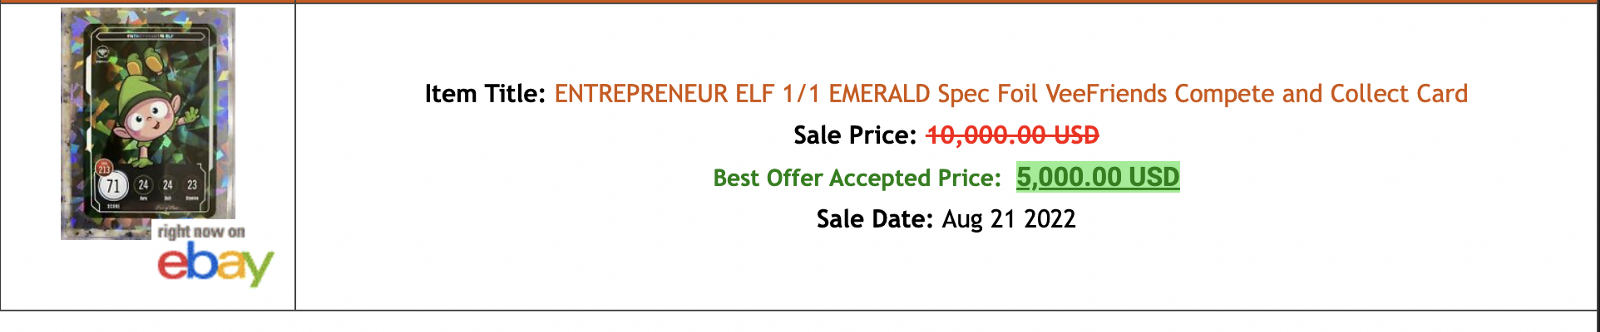 Entrepreneur Elf One of One Emerald - The Most Expensive VeeFriends Series 2 Compete and Collect Trading Card